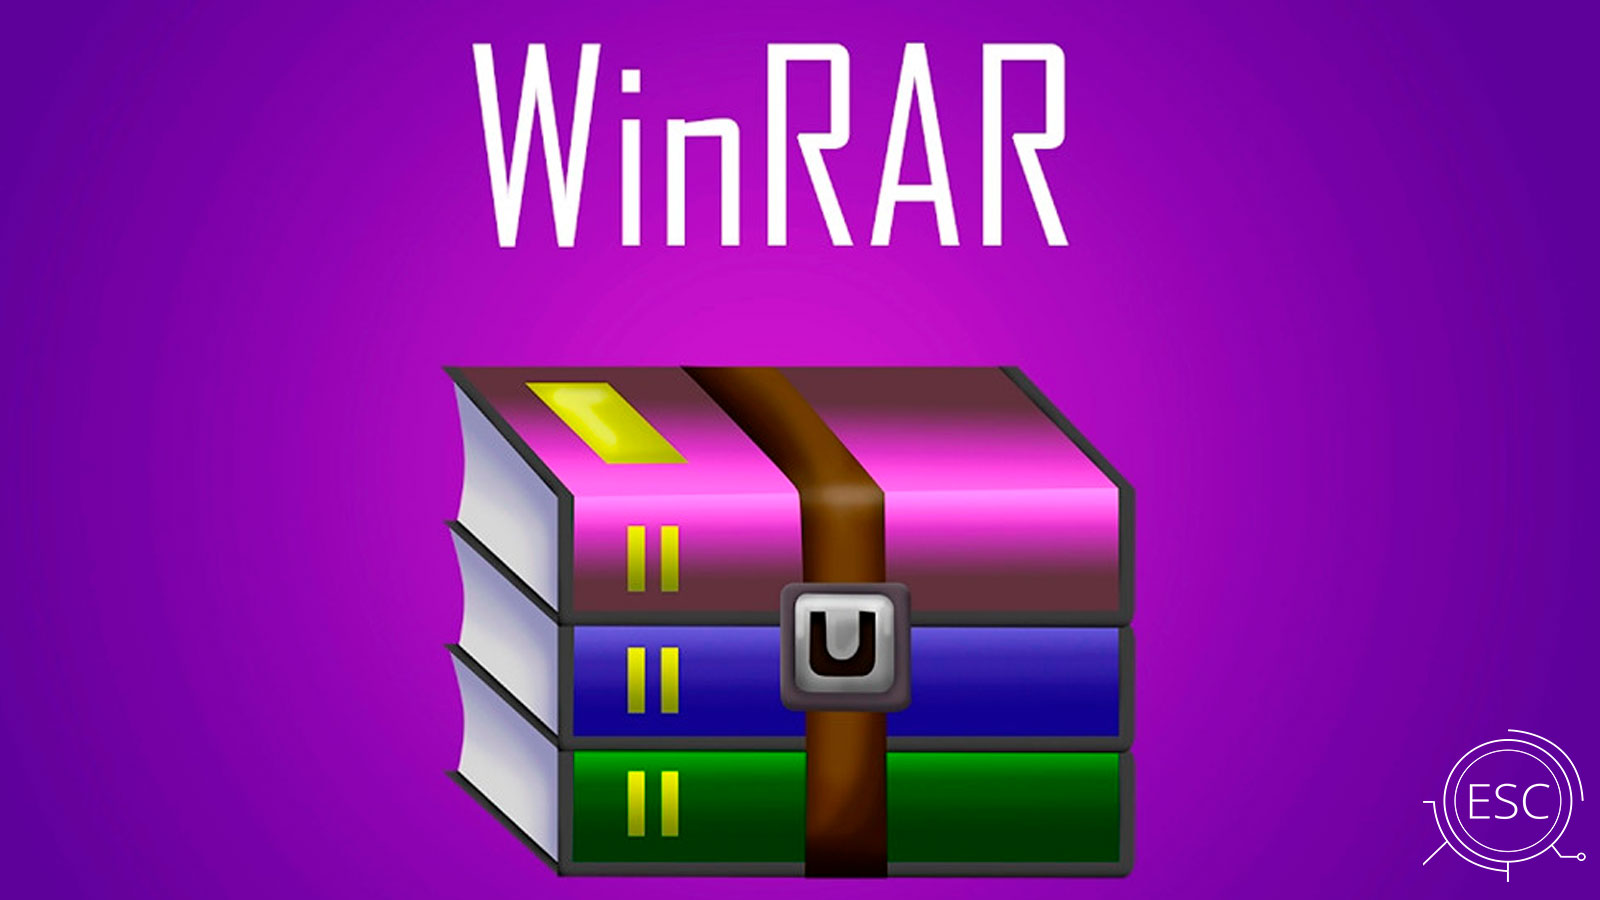 Winrar version 5.5 download download hp officejet pro 8600 plus driver for windows 10